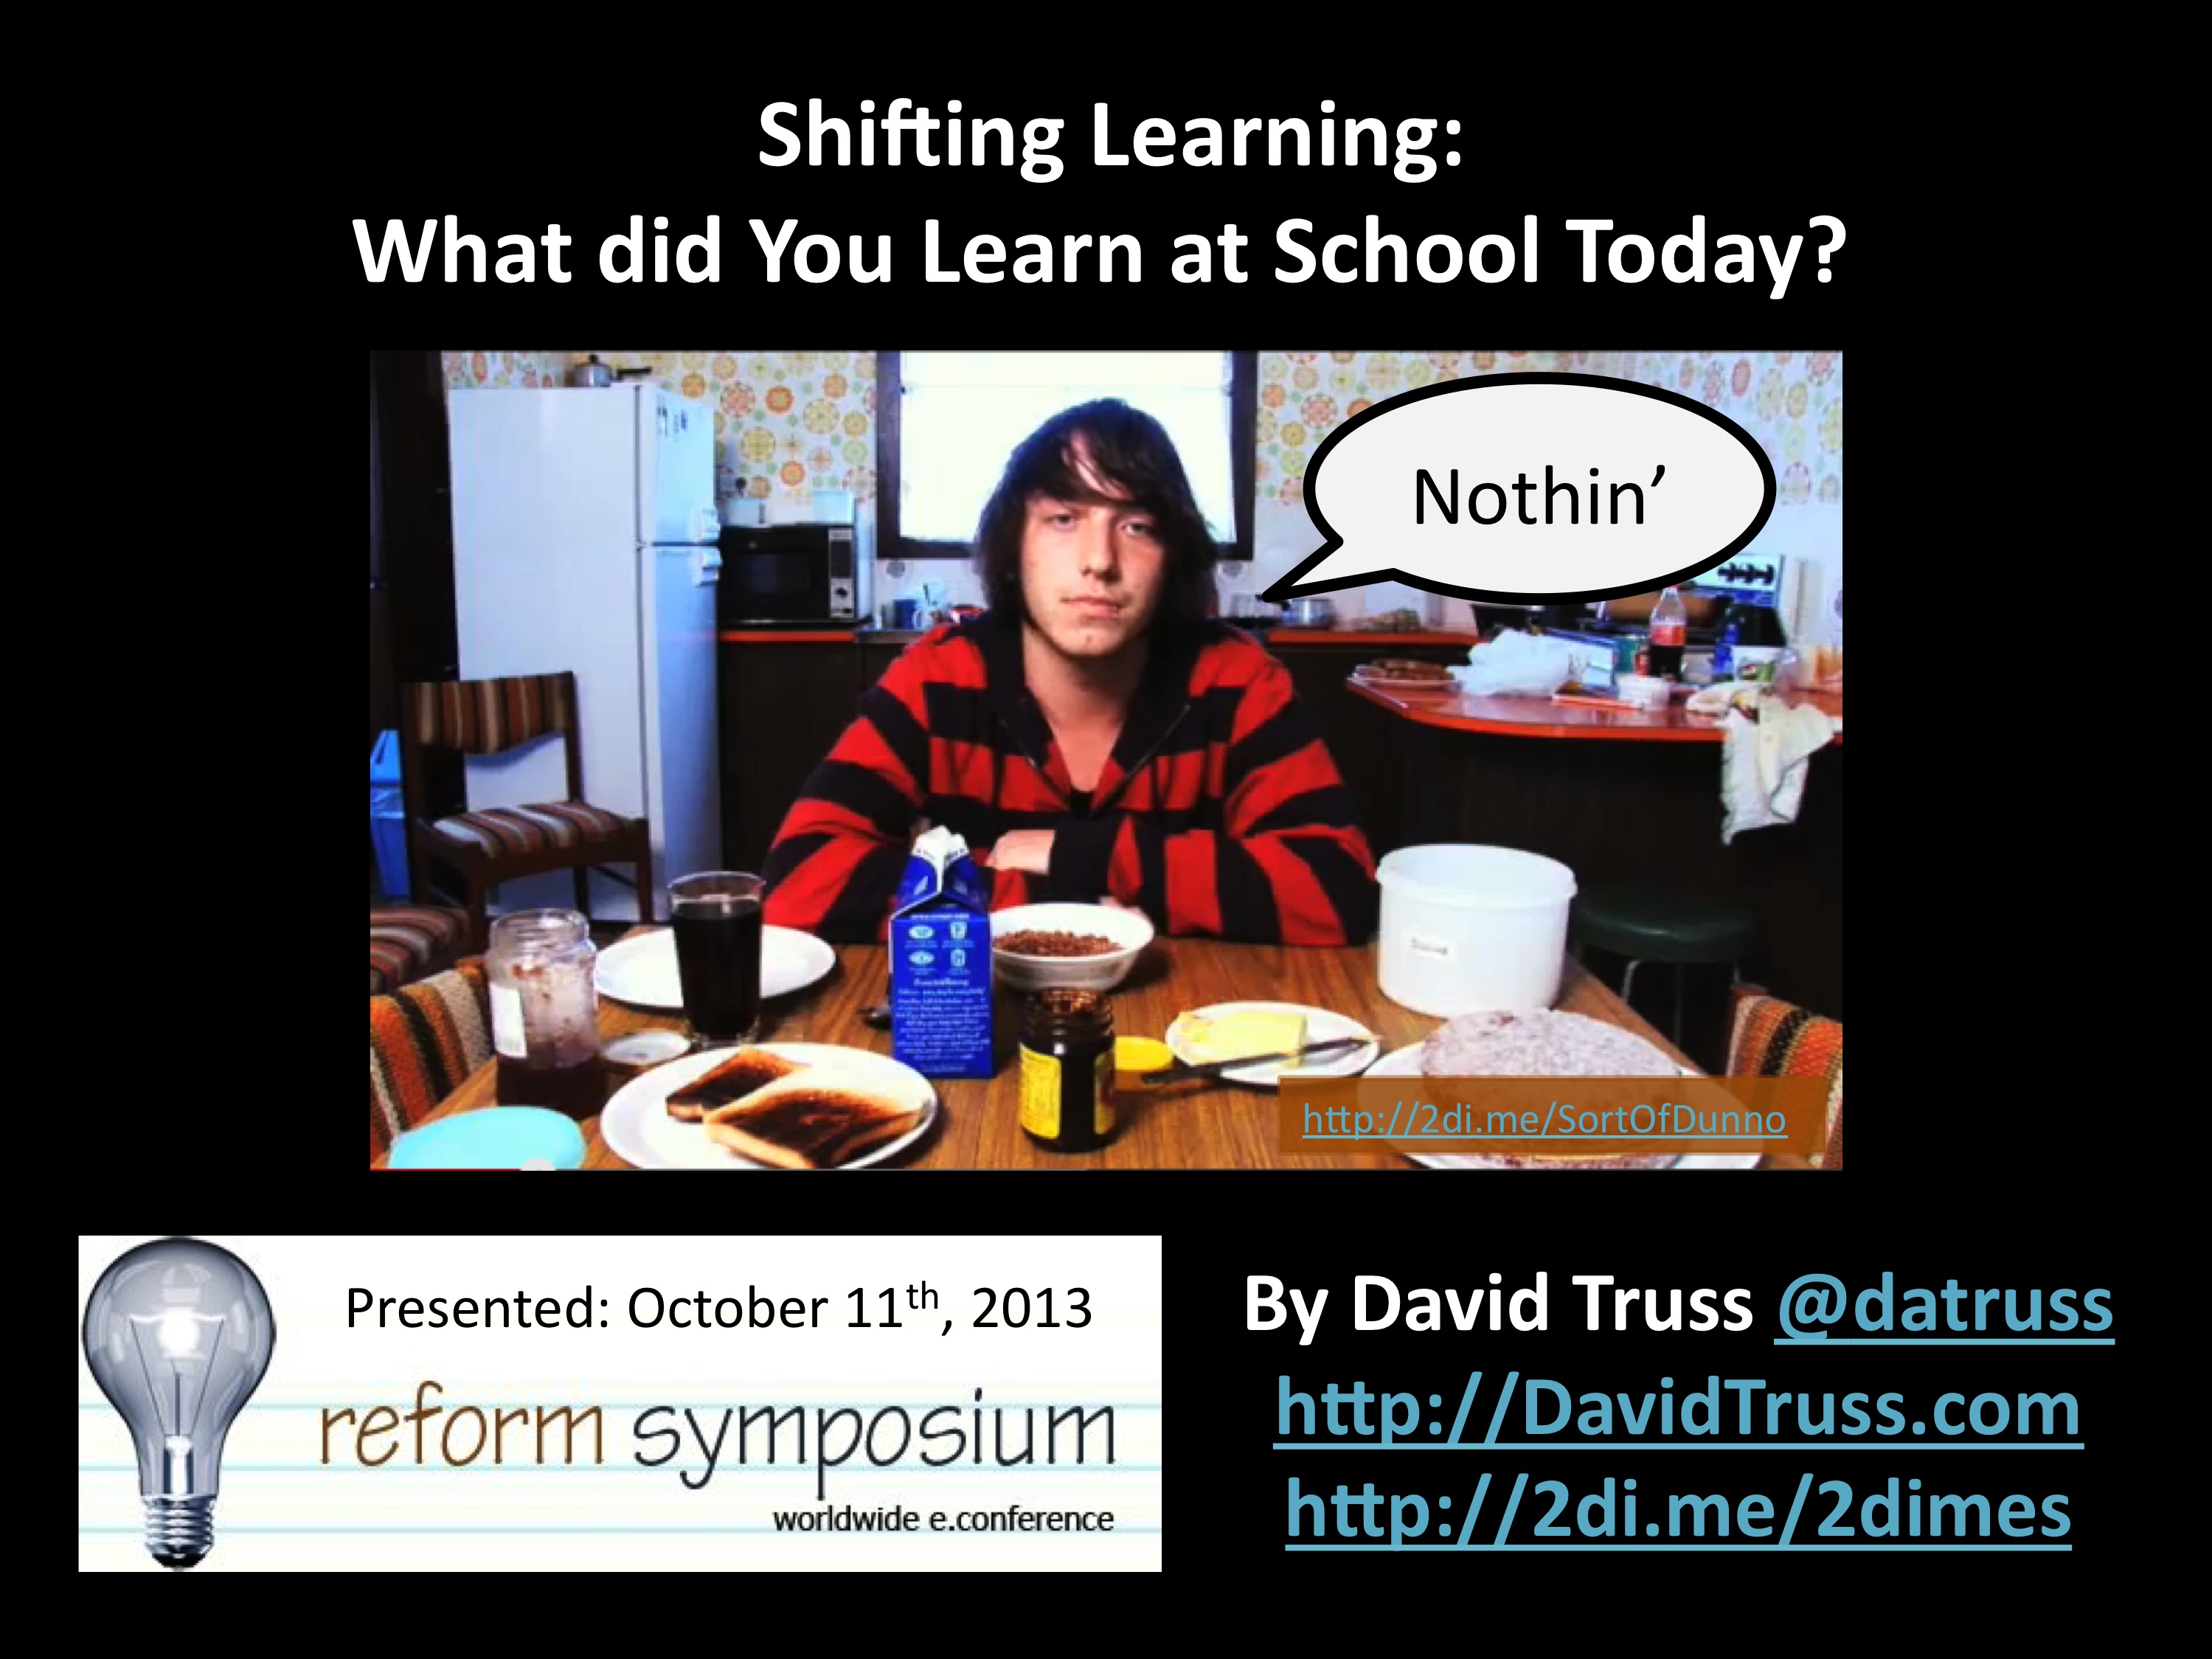 Shifting-Learning-What-Did-You-Learn-4-Educators-Cover-Image